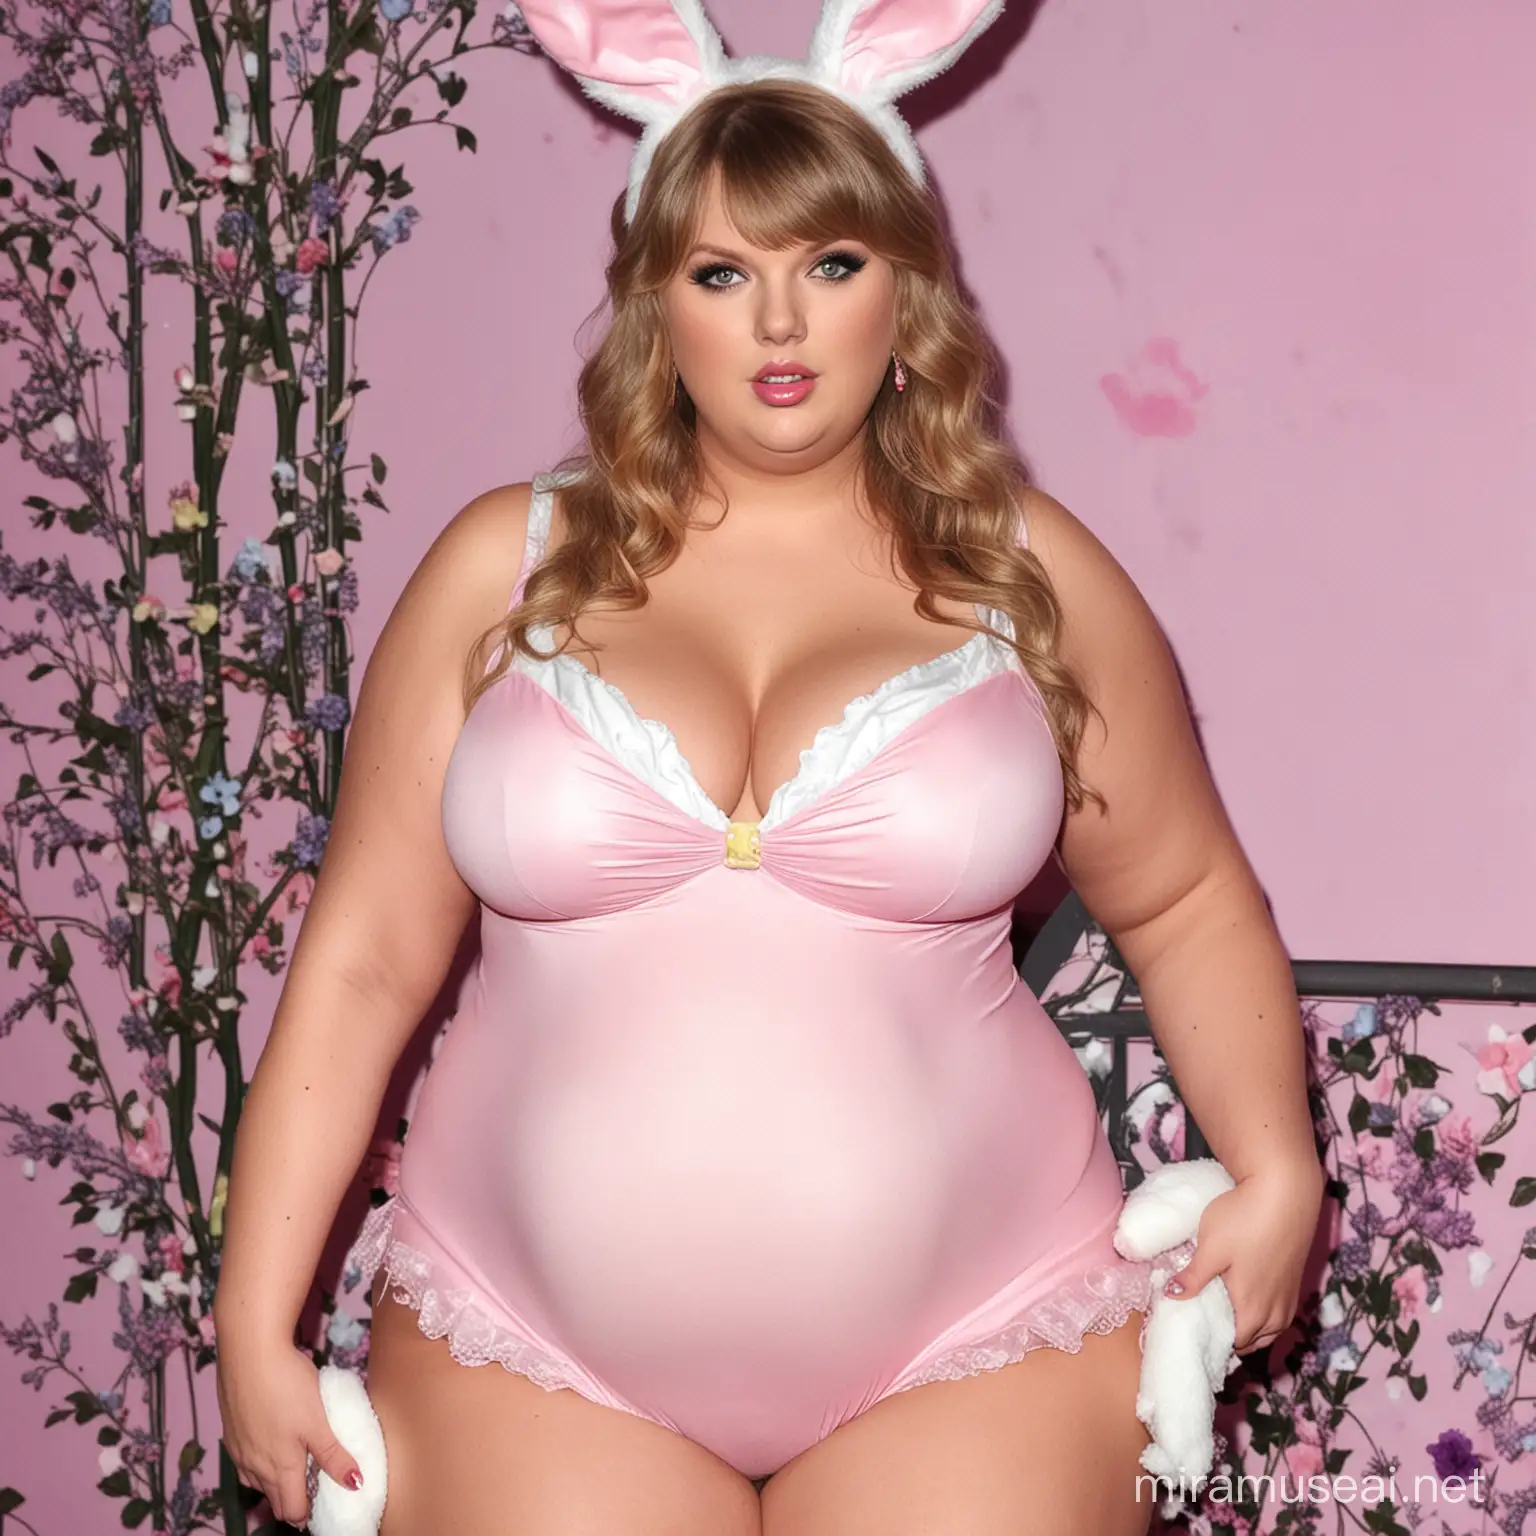 Morbidly-obese Taylor Swift dressed as a sexy Easter Bunny